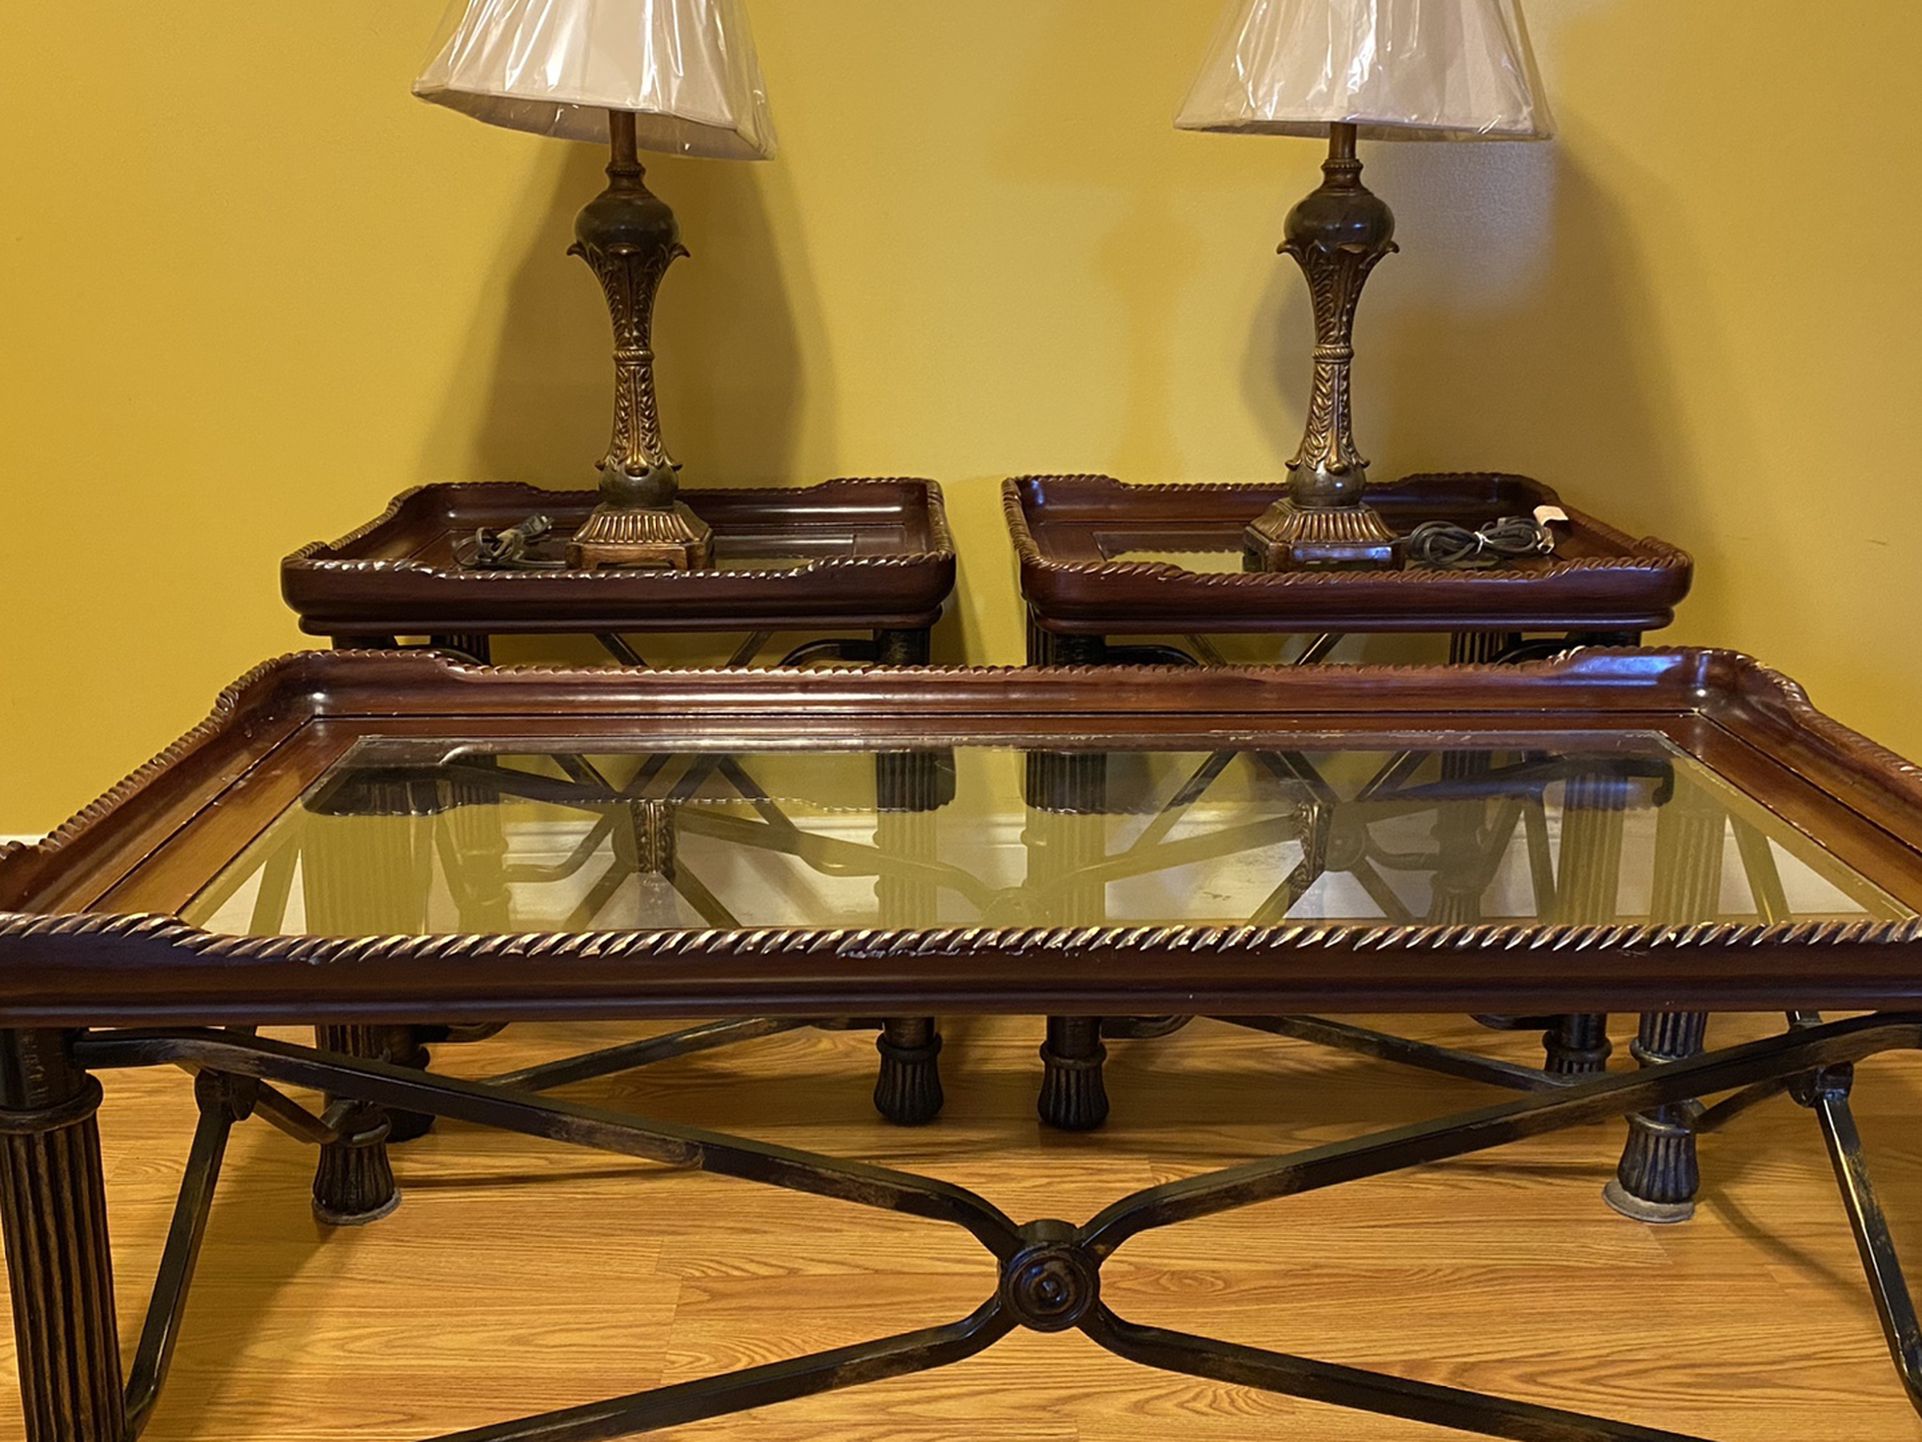 3 Piece Coffee Table Set with Lamps